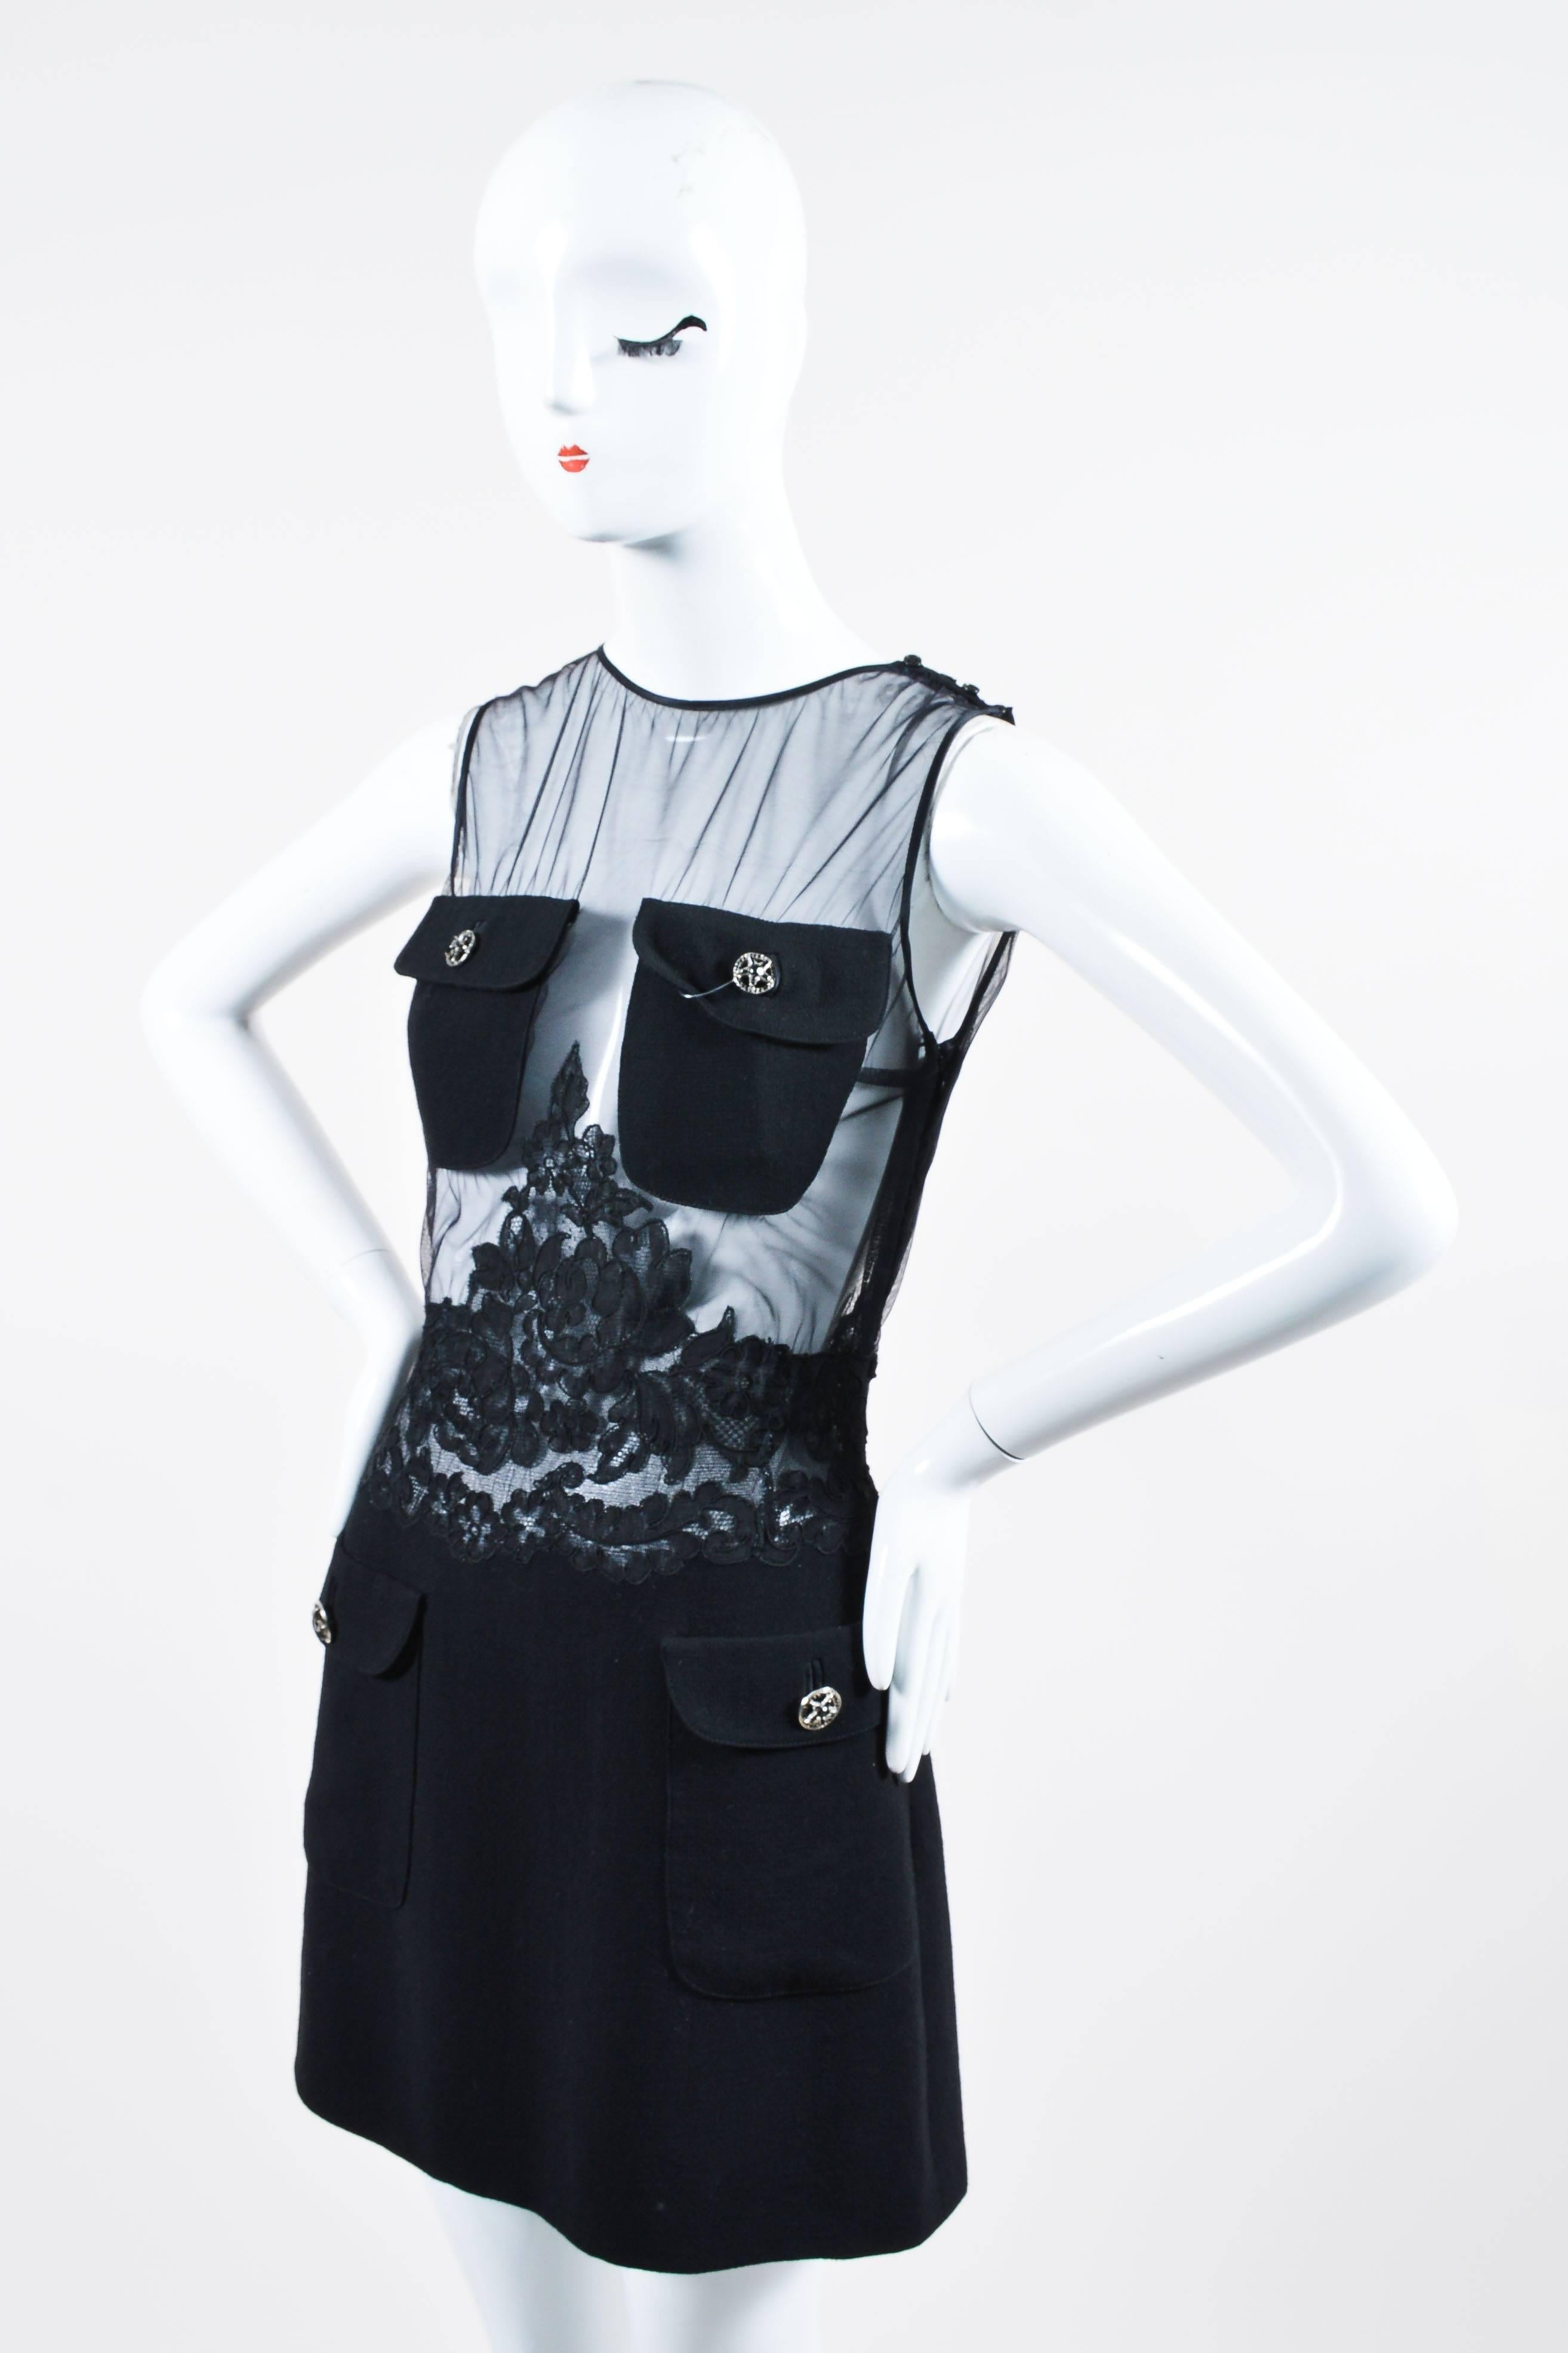 Retails at $2150. Vintage item, with original tags from the Istante line circa 1980's. Edgy sheath dress. Black sheer mesh bodice with lace trim around waist. Woven wool blend skirt. Sleeveless. Rounded neckline. Knee length hem. Flap pockets with